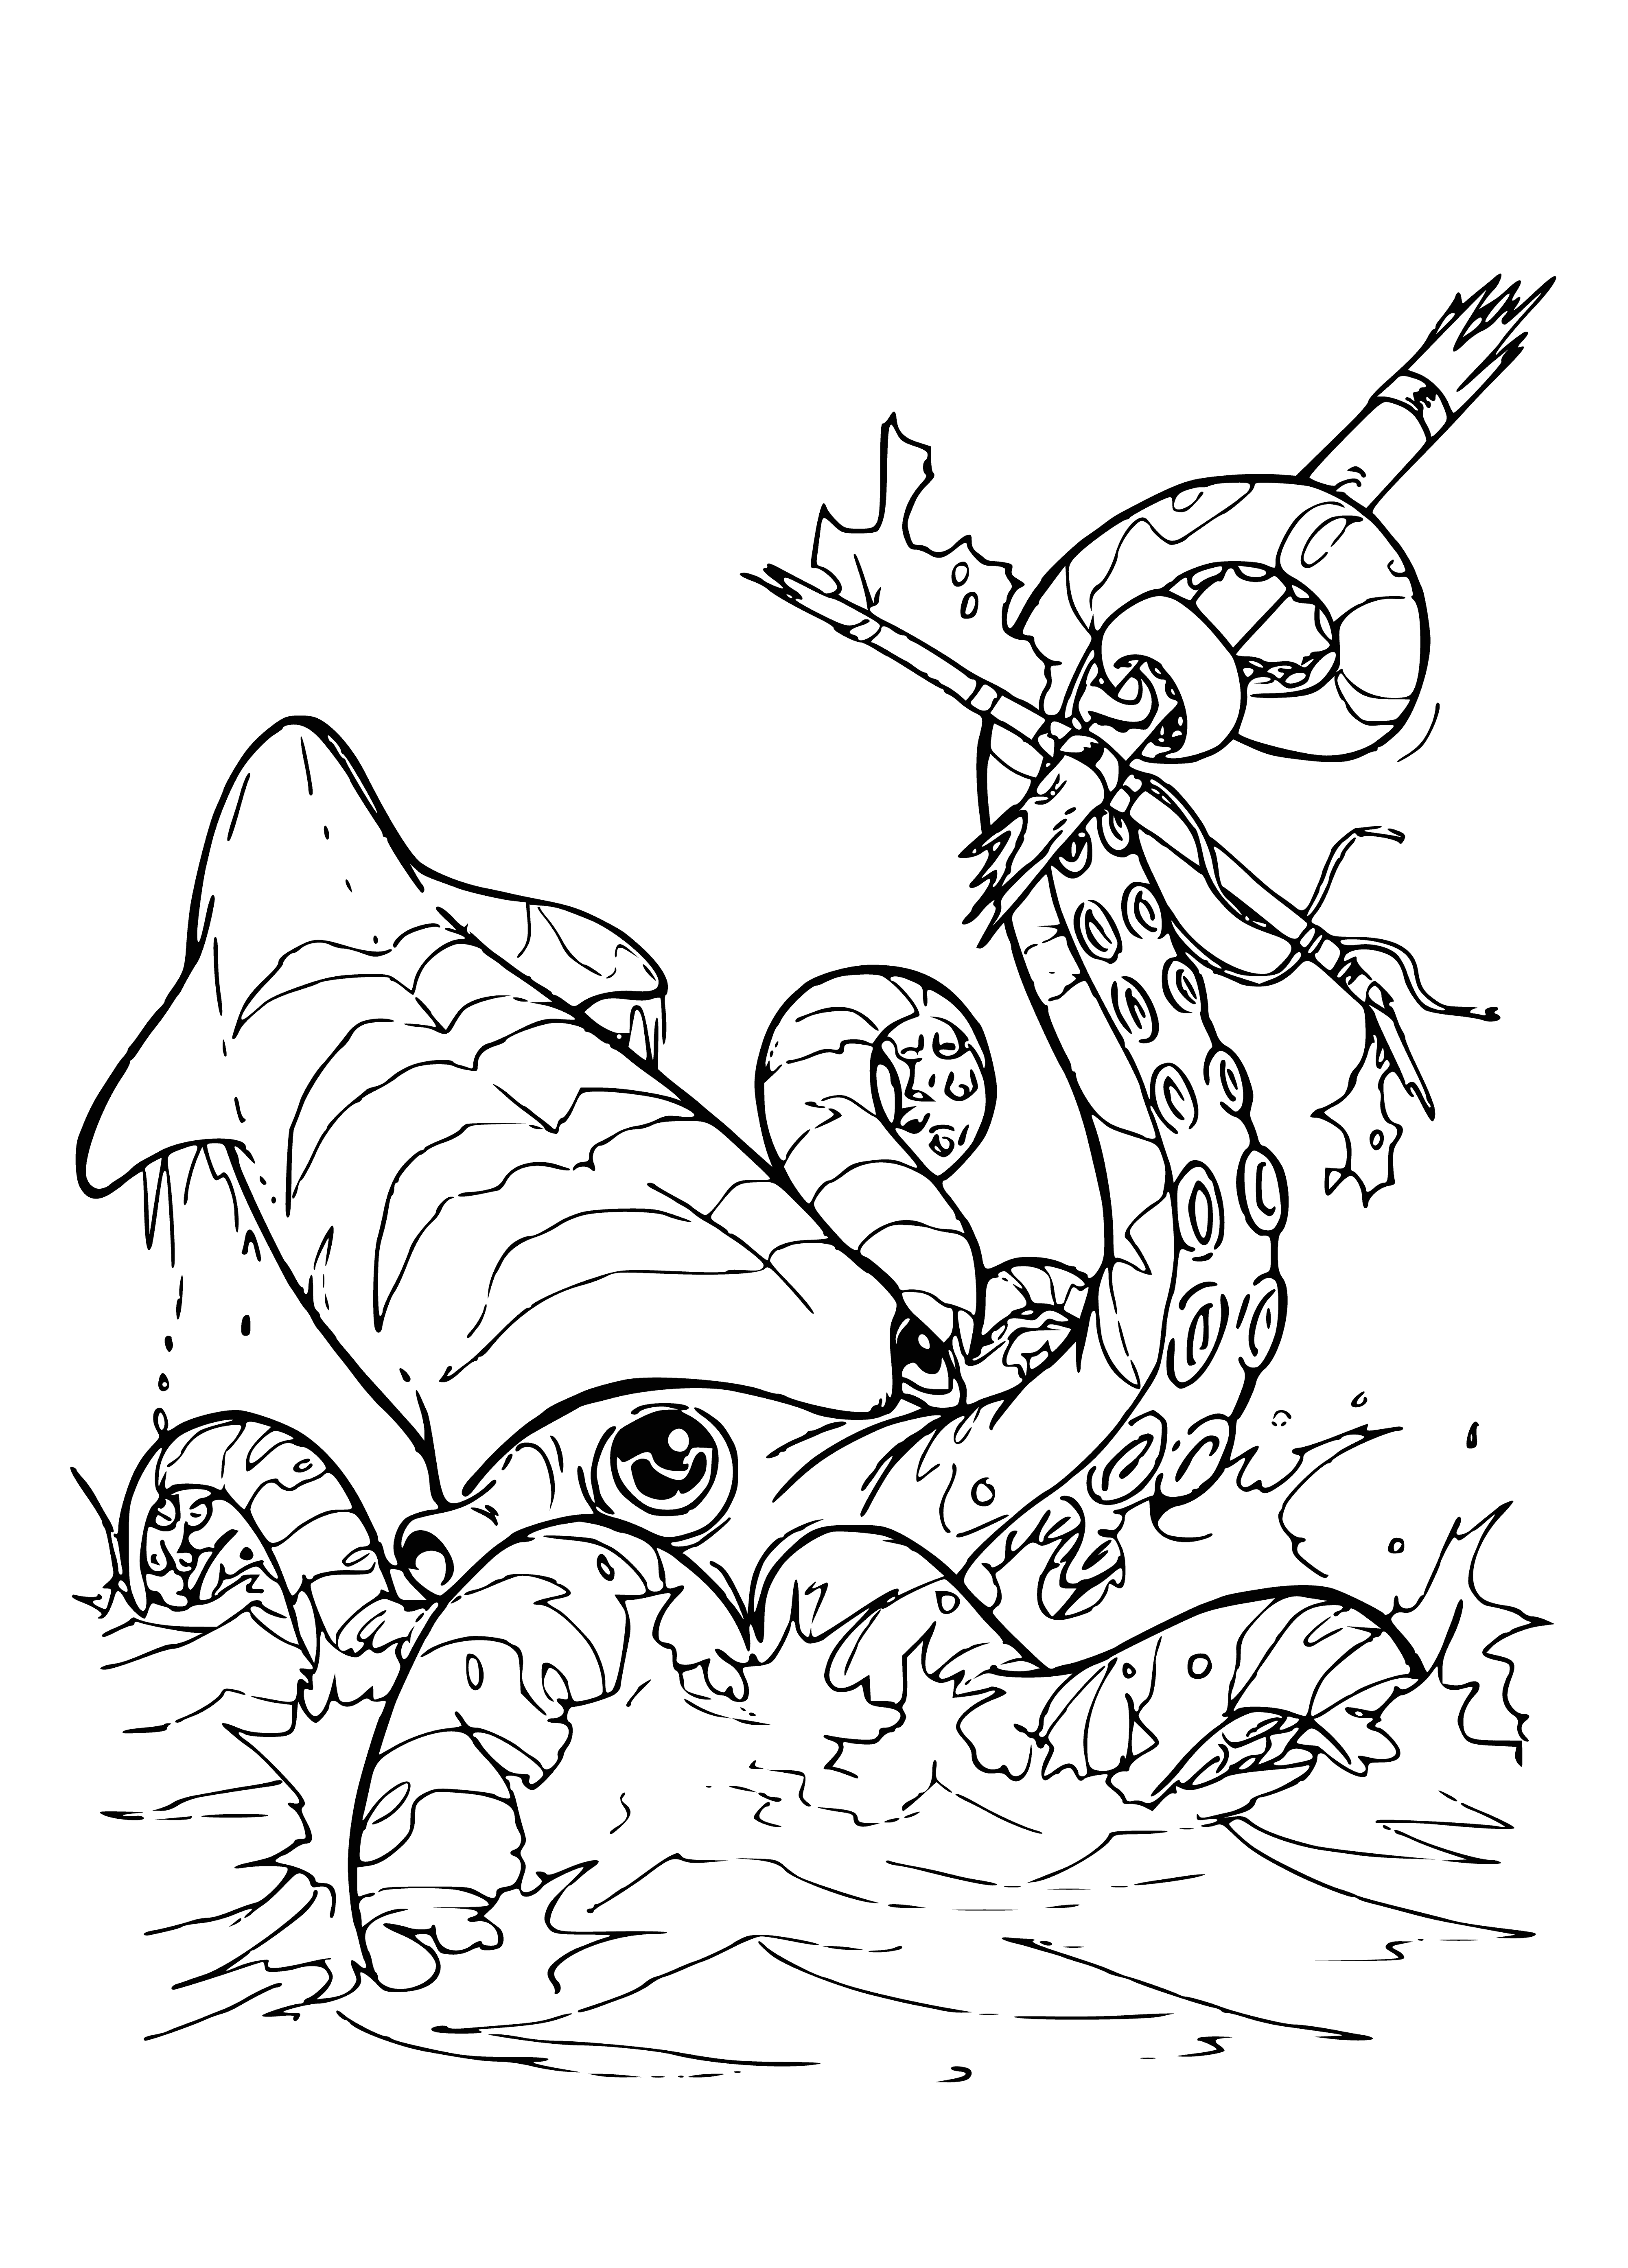 coloring page: Vile octopus with eight writhing tentacles and a toothy maw clearly means harm - poised to strike!